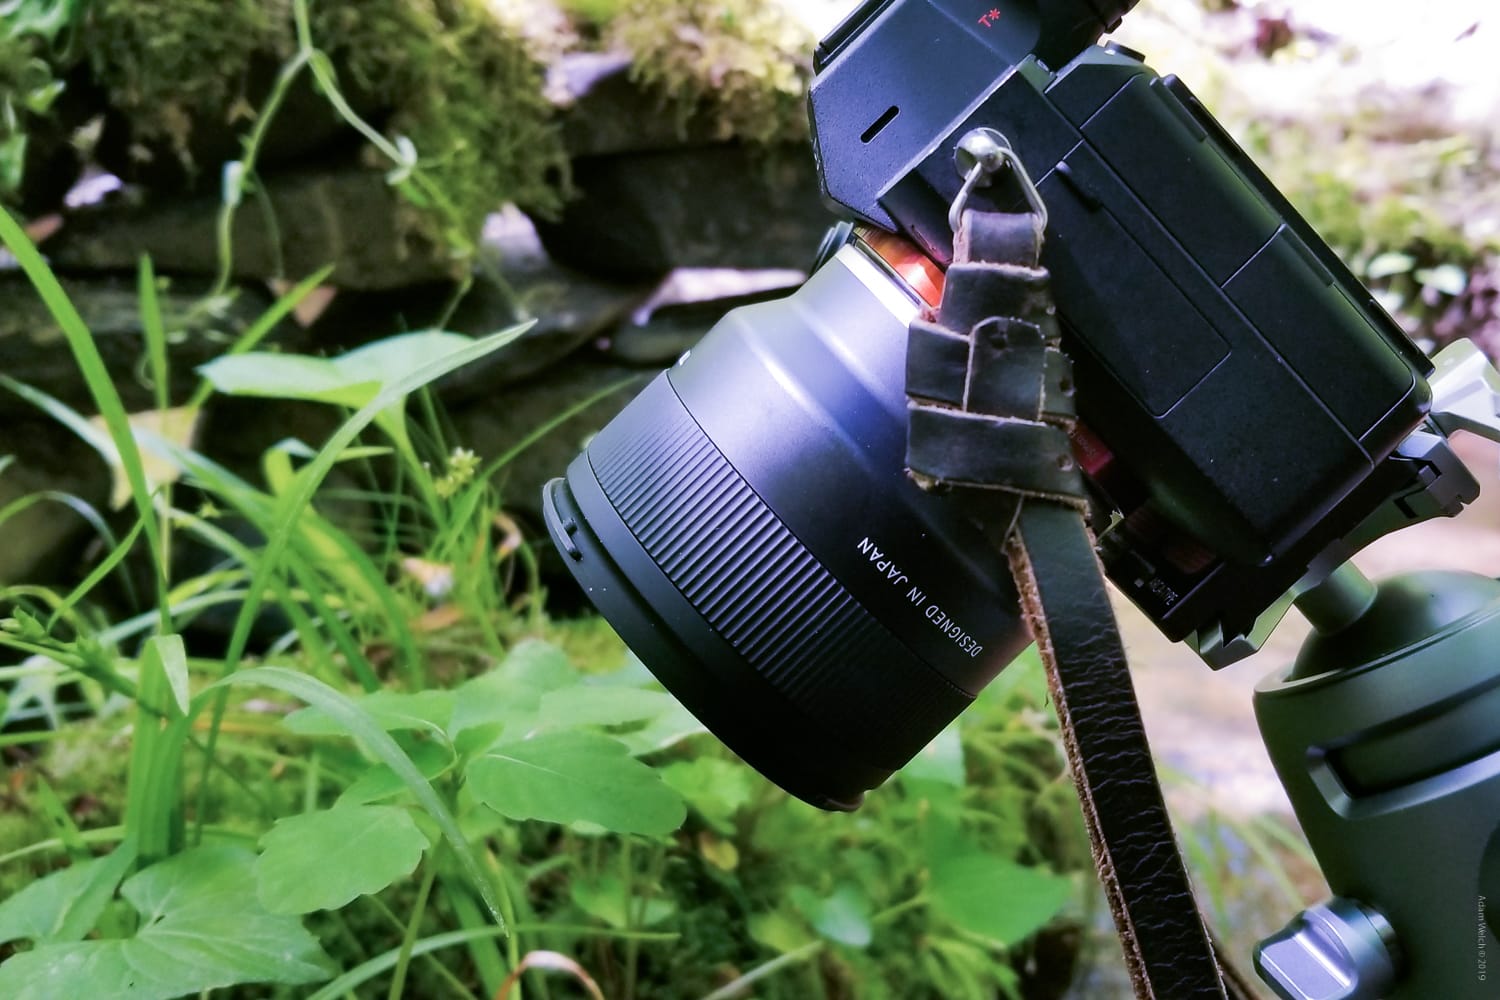 Hands-On Review of the Tamron 20mm f/2.8 Di III OSD M1:2 for Sony FE-Mount